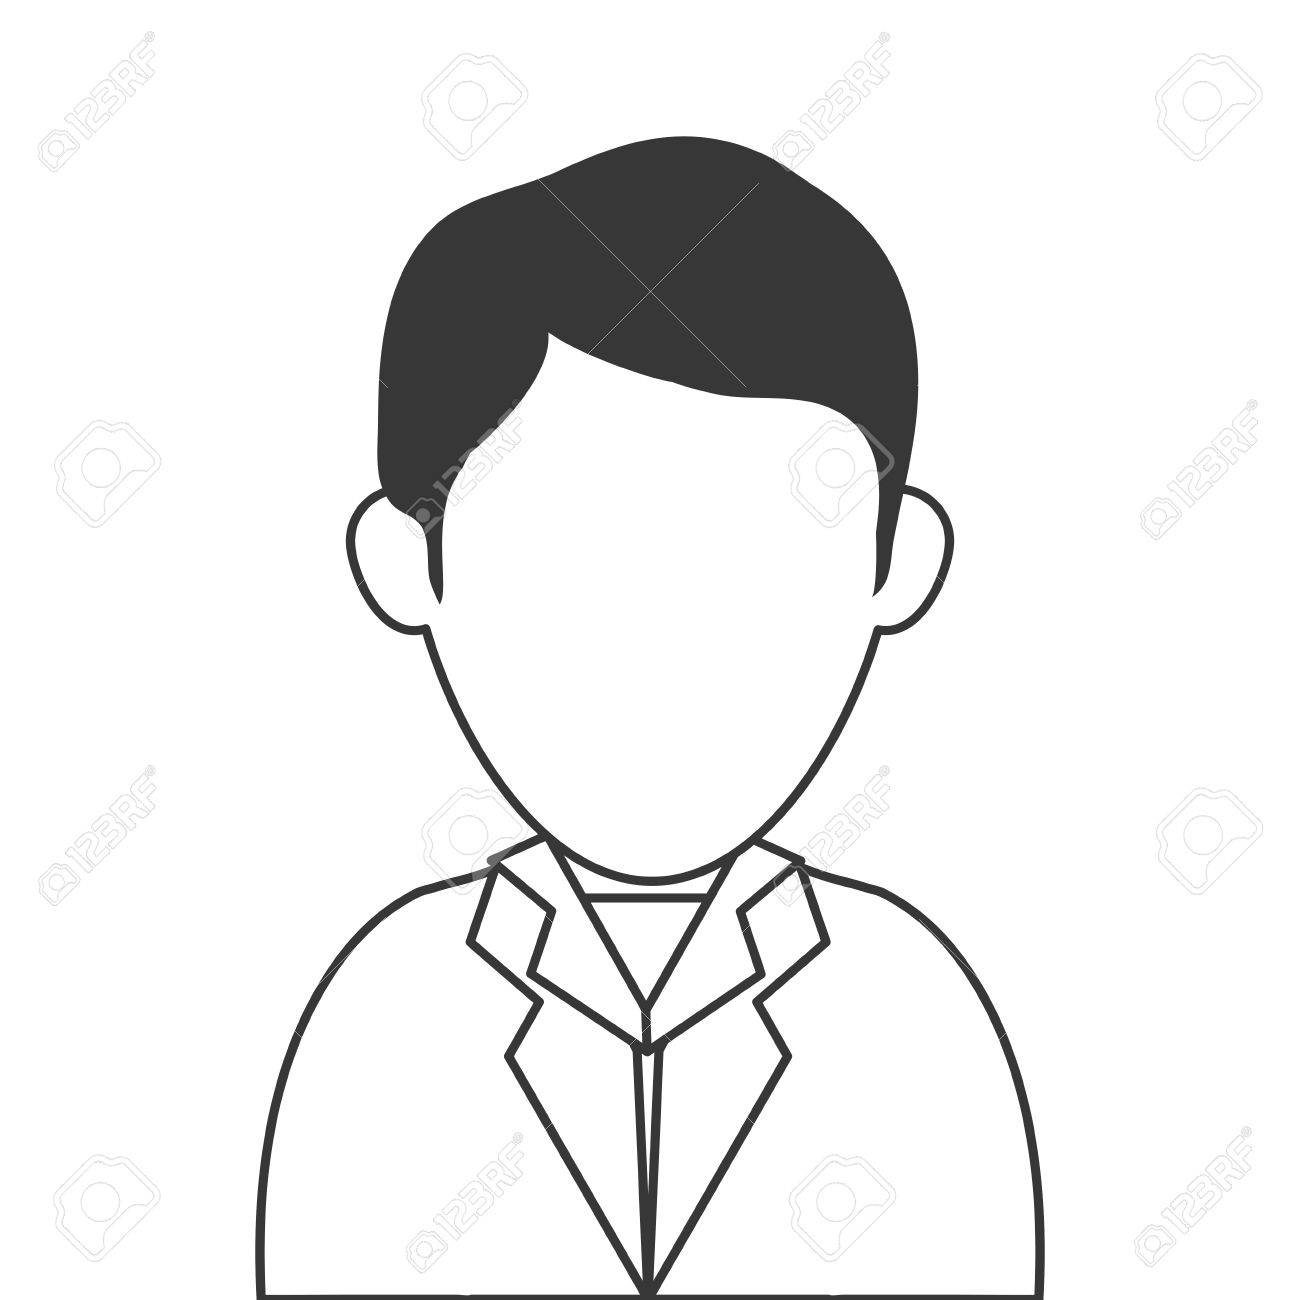 Suit clipart man drawing. In free download best